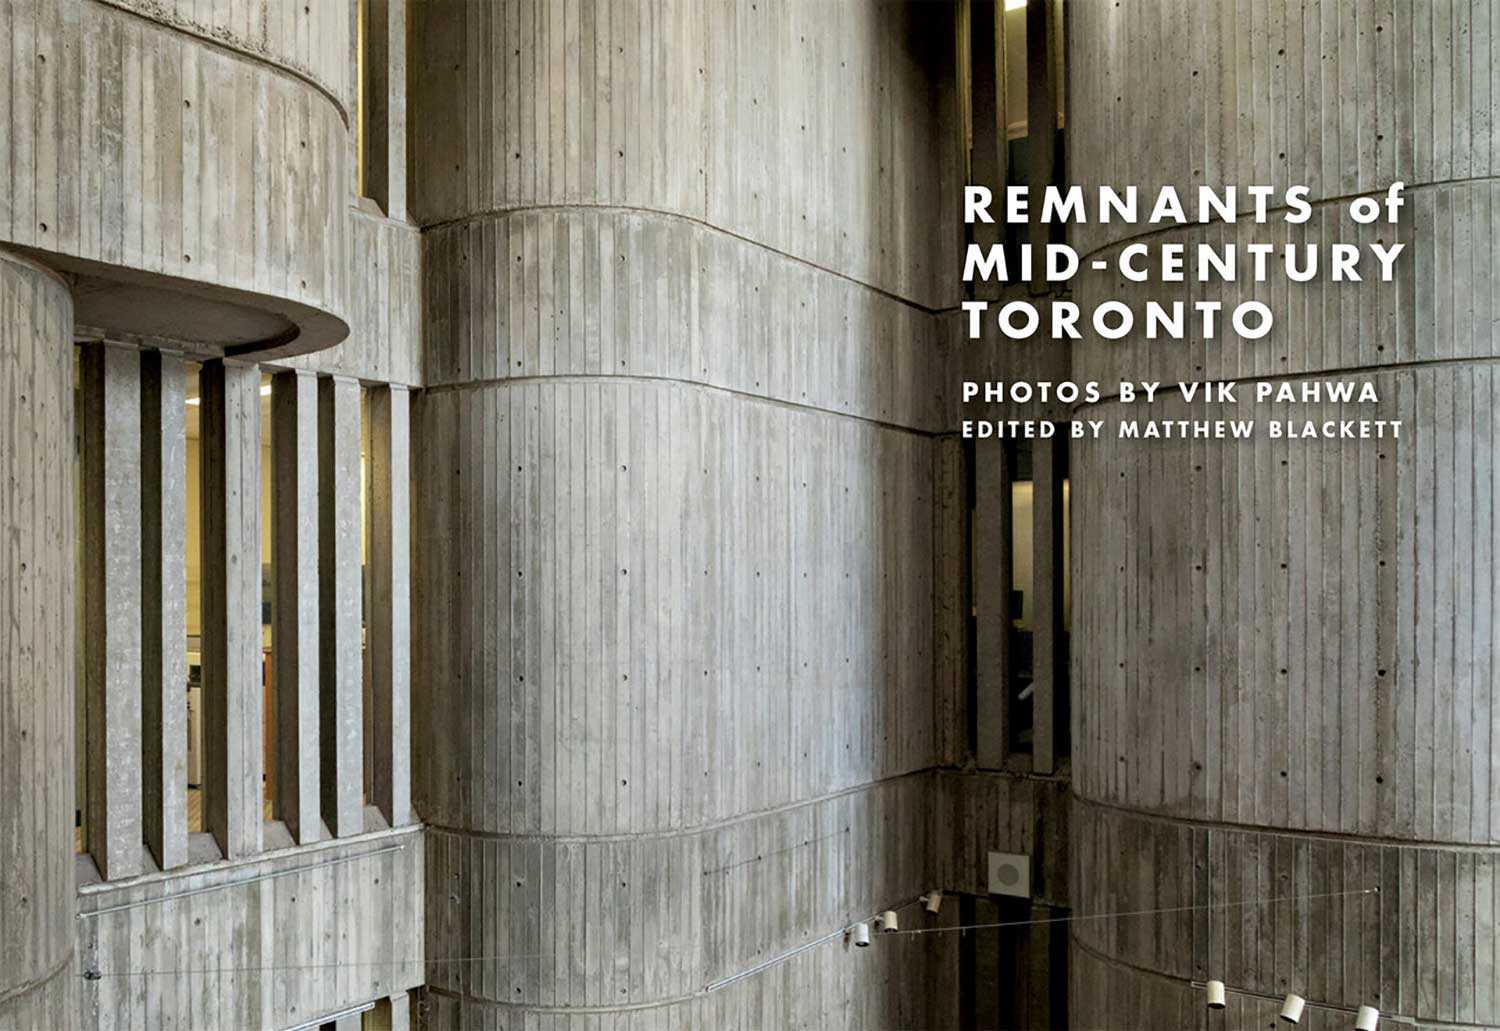 The Remnants of Mid-Century Toronto Photobook by Spacing and Vik Pahwa